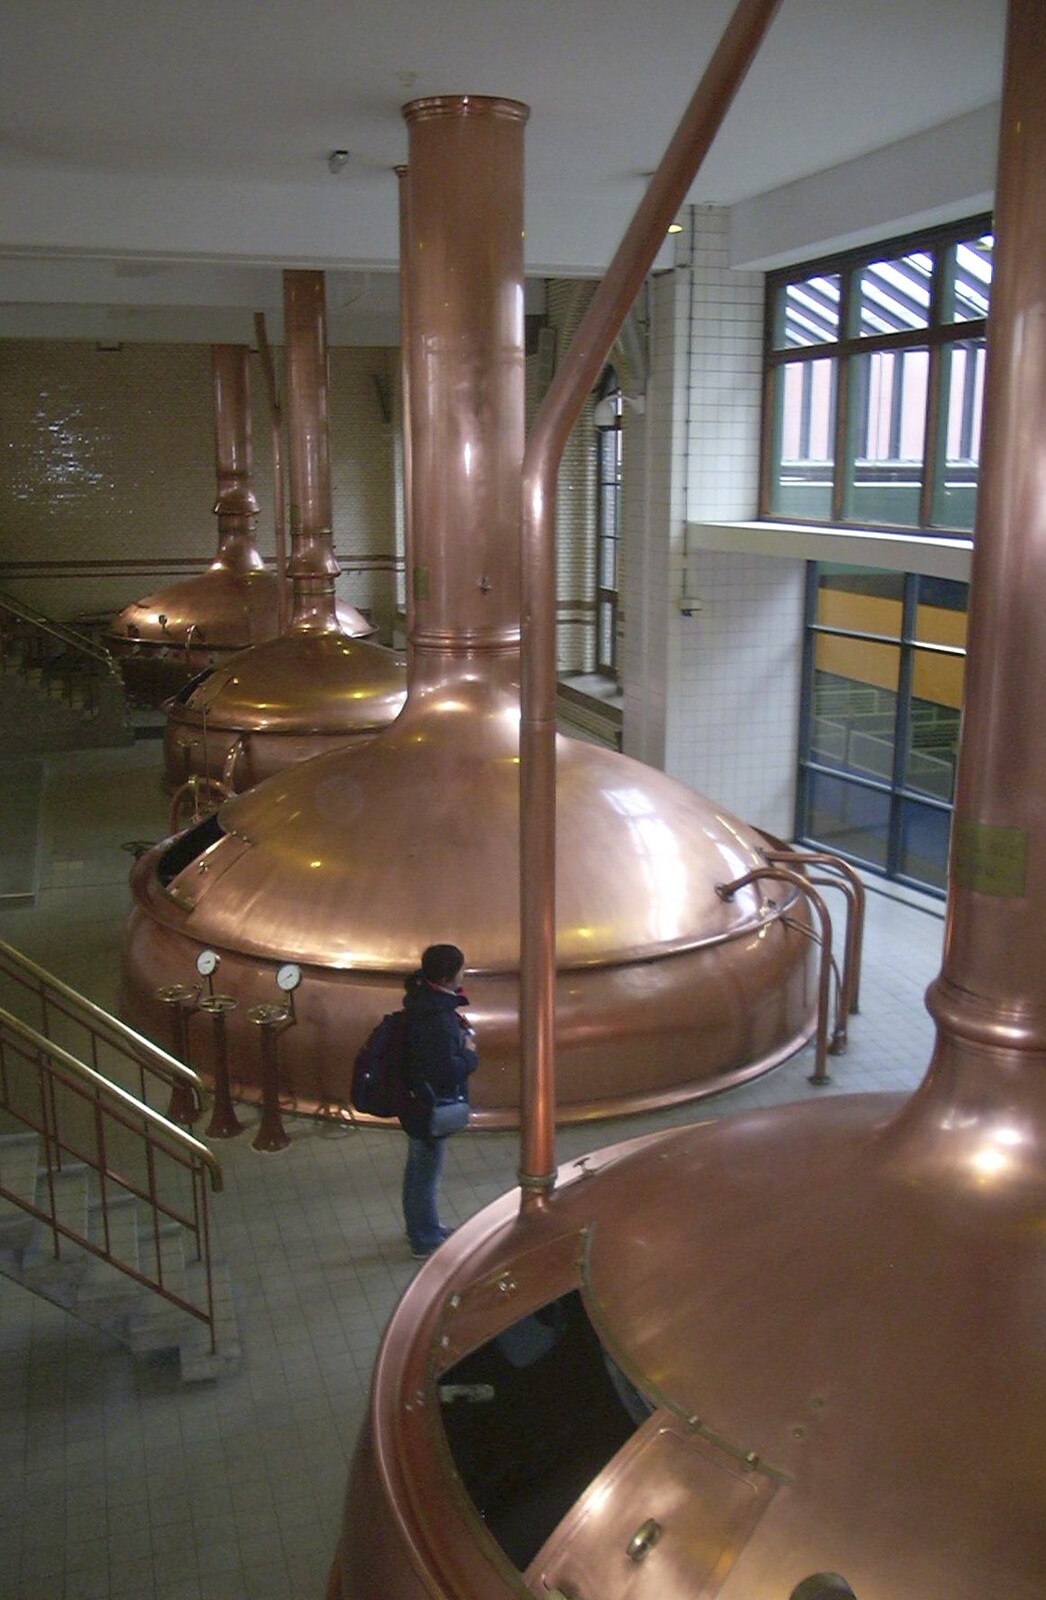 A line of nice copper fermenters from Anne Frank, Markets and Mikey-P's Stag Do, Amsterdam, Netherlands - 6th March 2004